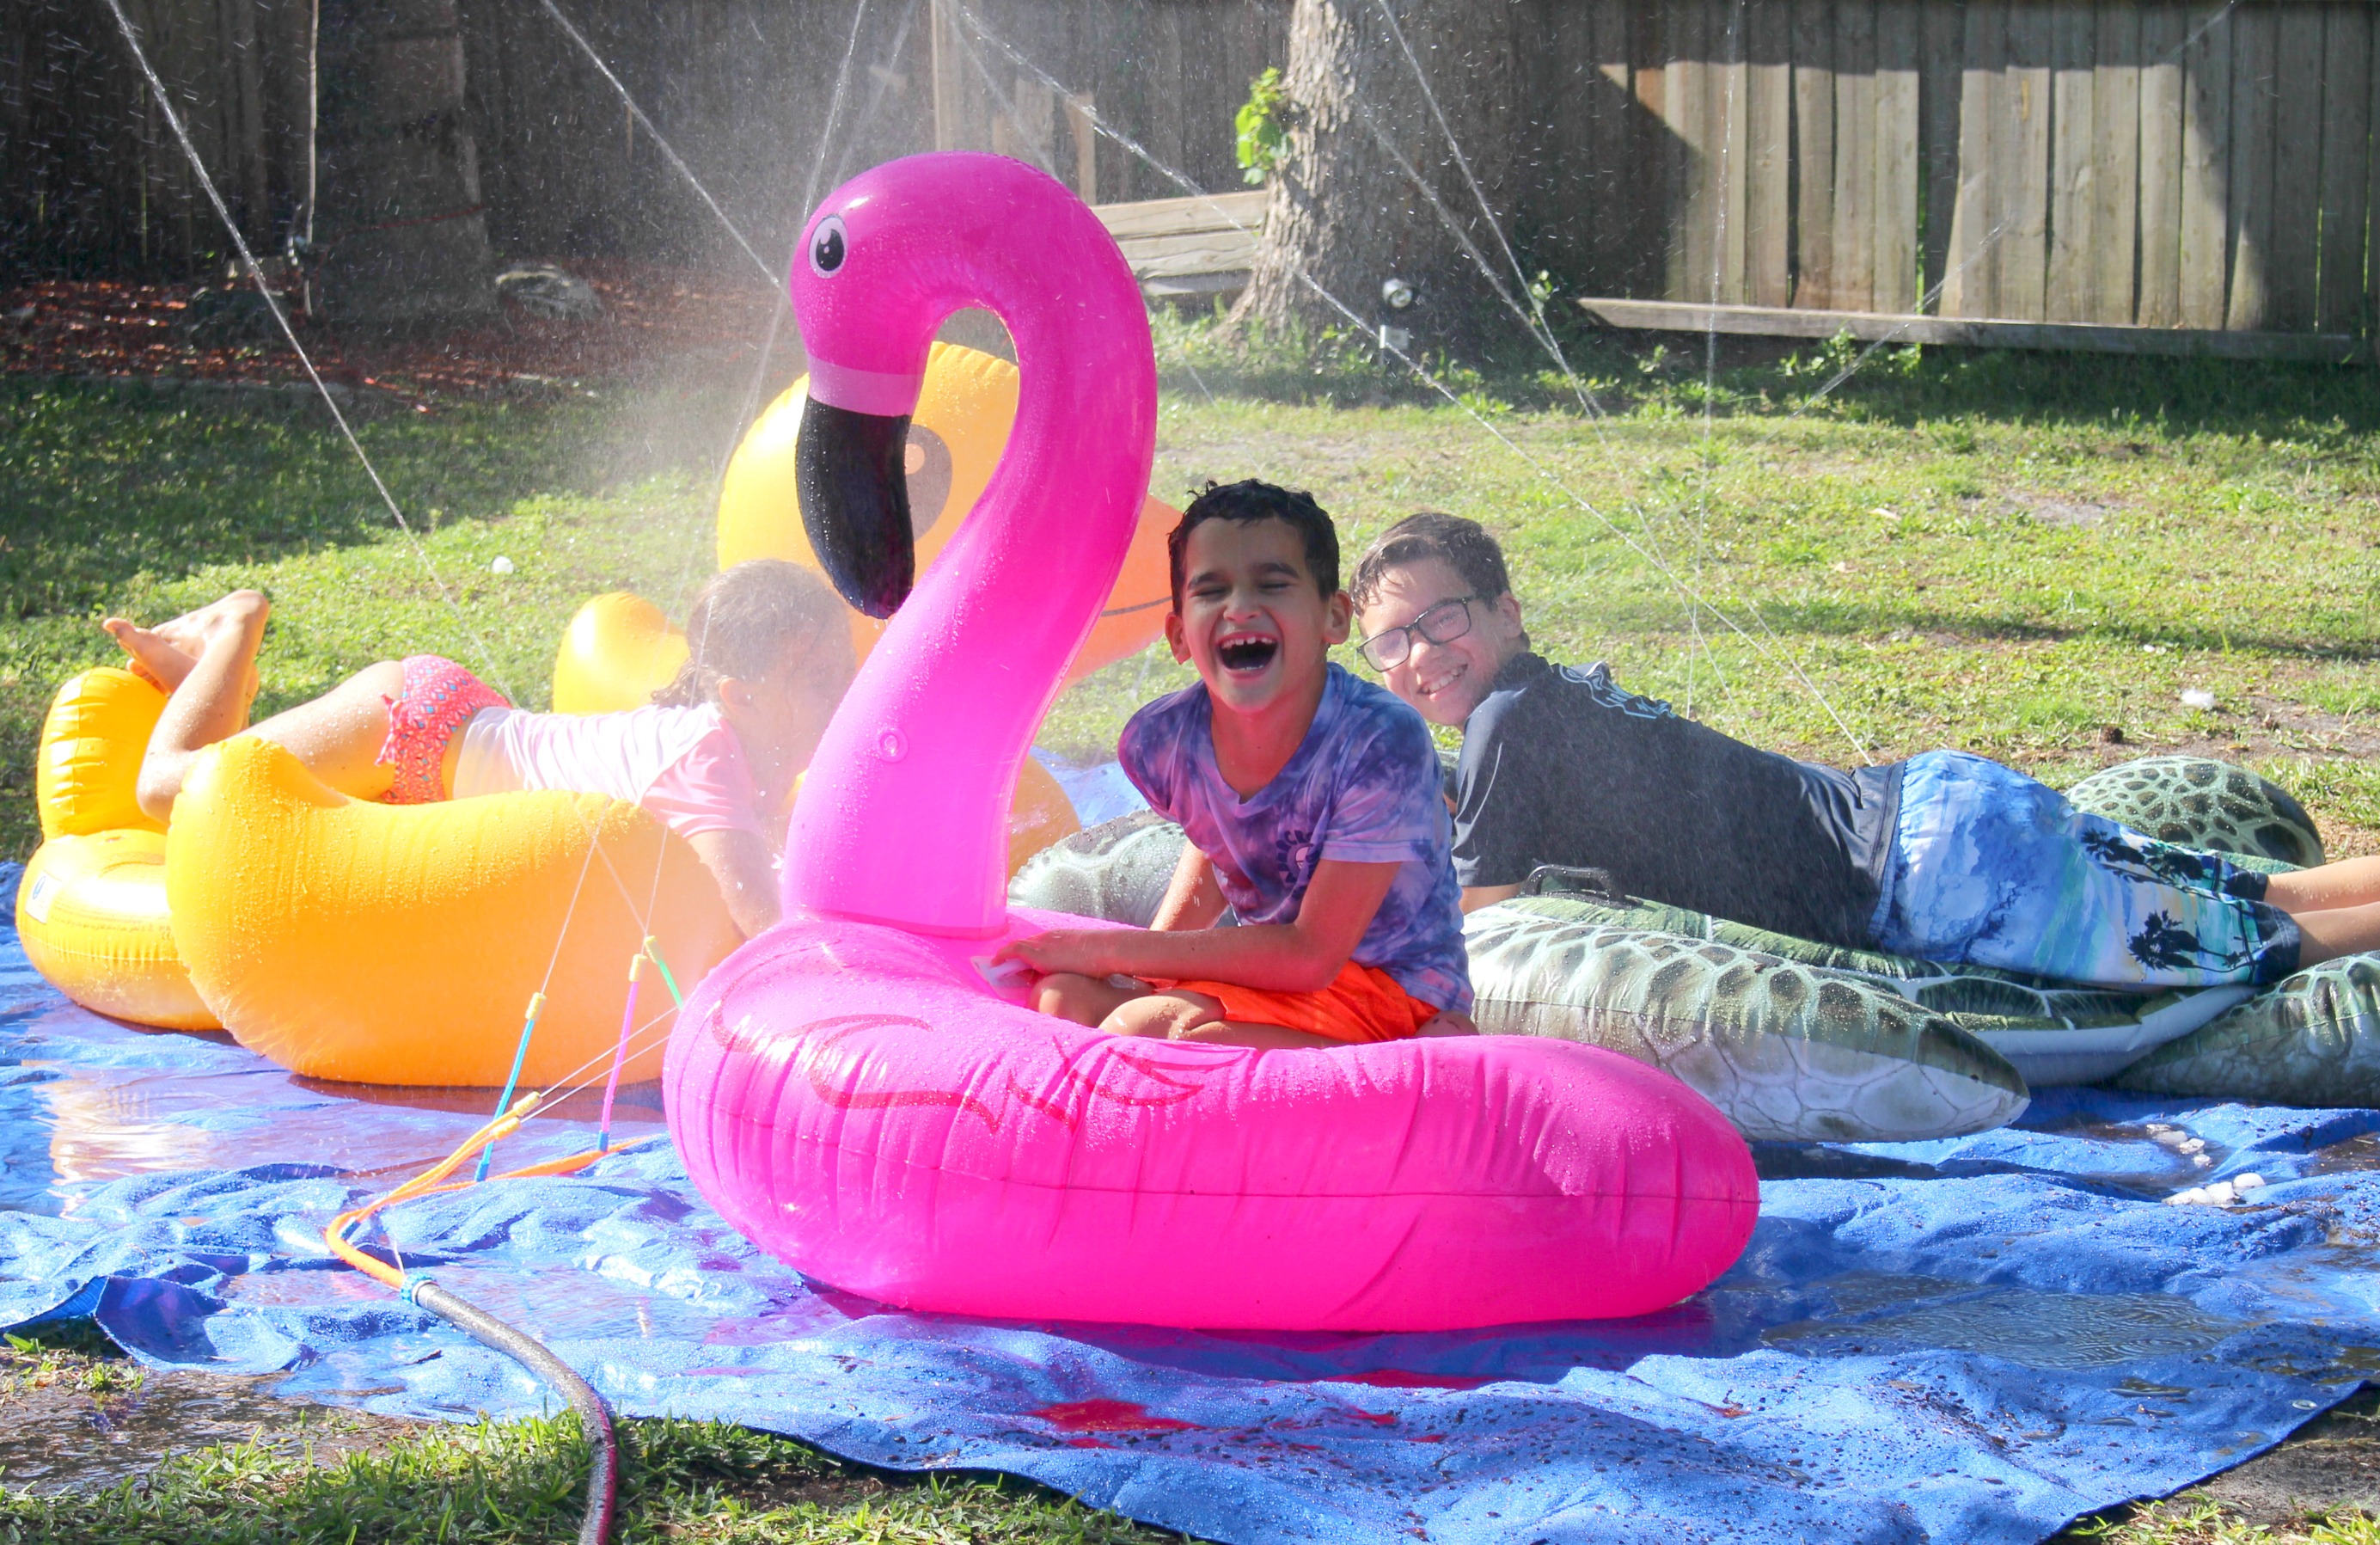 Plan the Happiest Playdate with Pool Float Musical Chairs